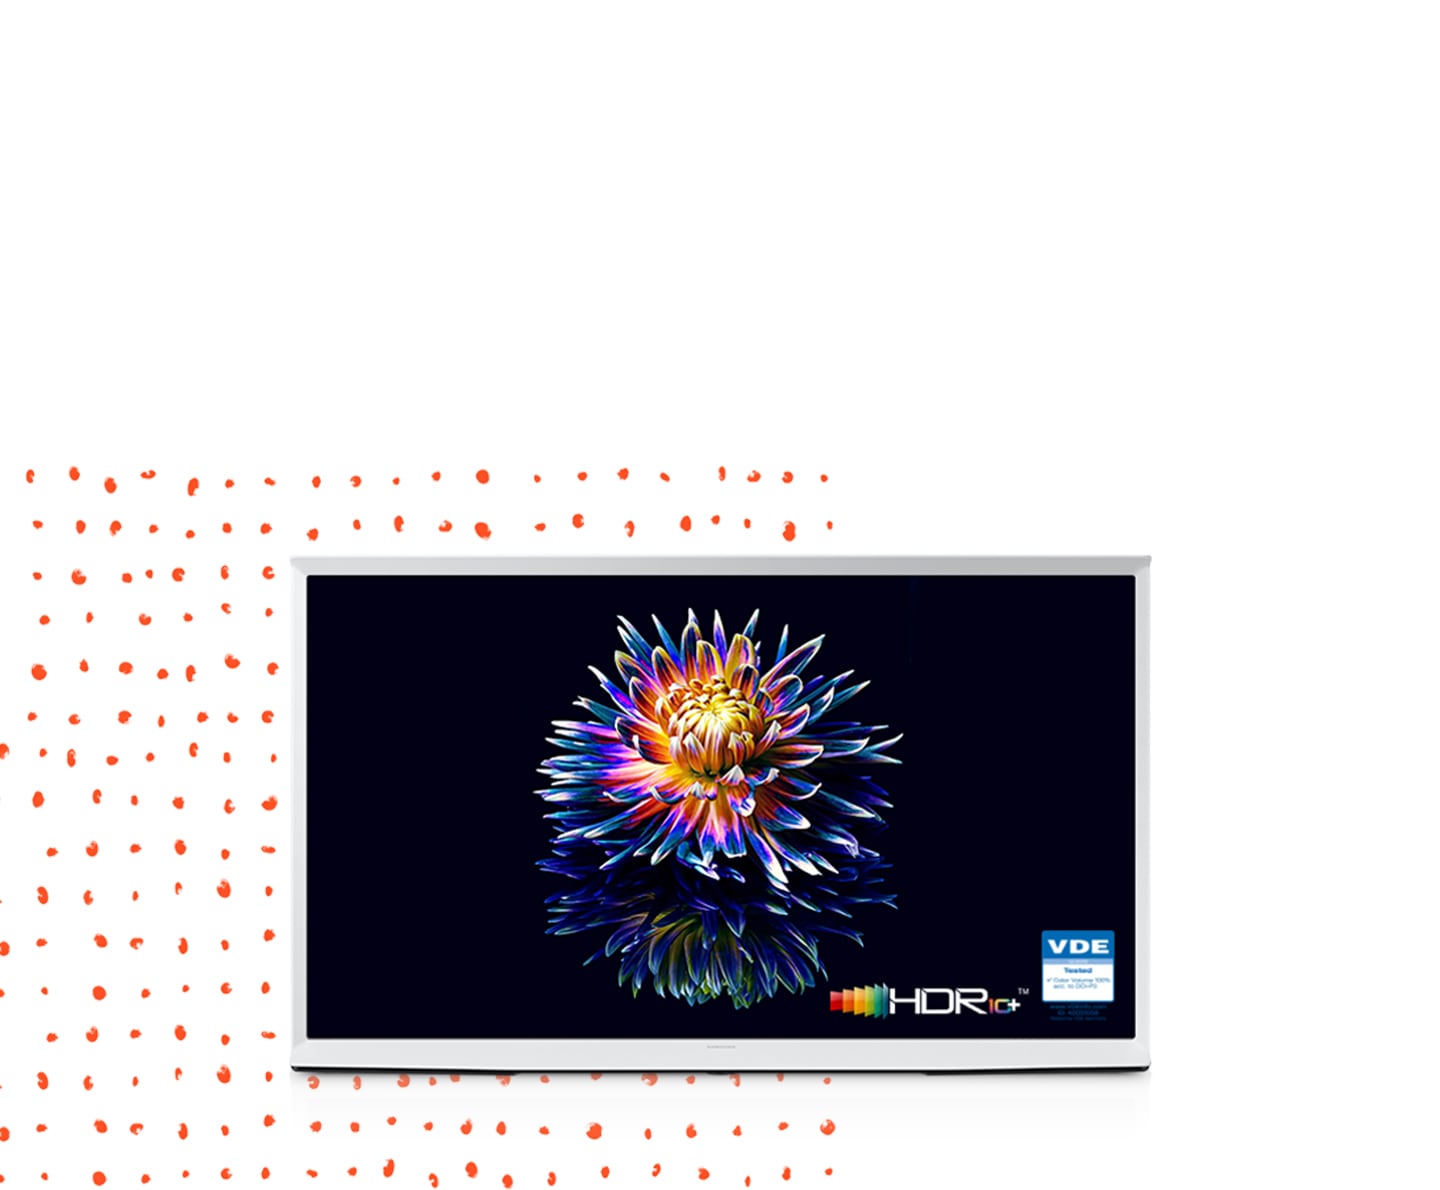 A flower is blooming on The Serif TV screen in vivid color. The 'HDR 10+' and 'VDE' logos are on display in the bottom.